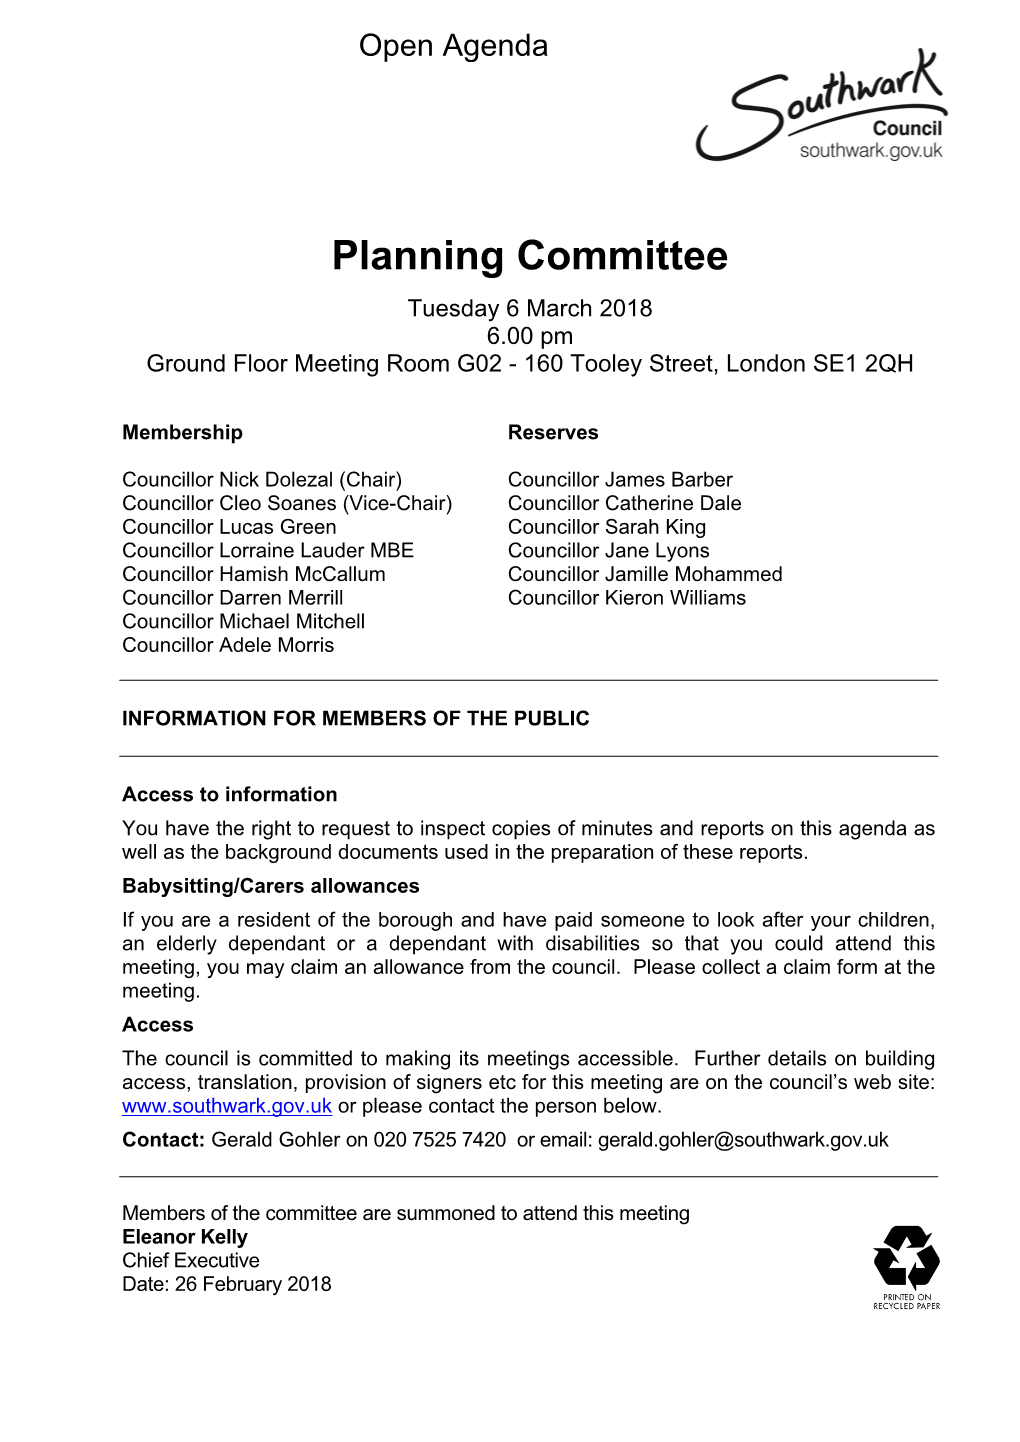 Planning Committee Tuesday 6 March 2018 6.00 Pm Ground Floor Meeting Room G02 - 160 Tooley Street, London SE1 2QH